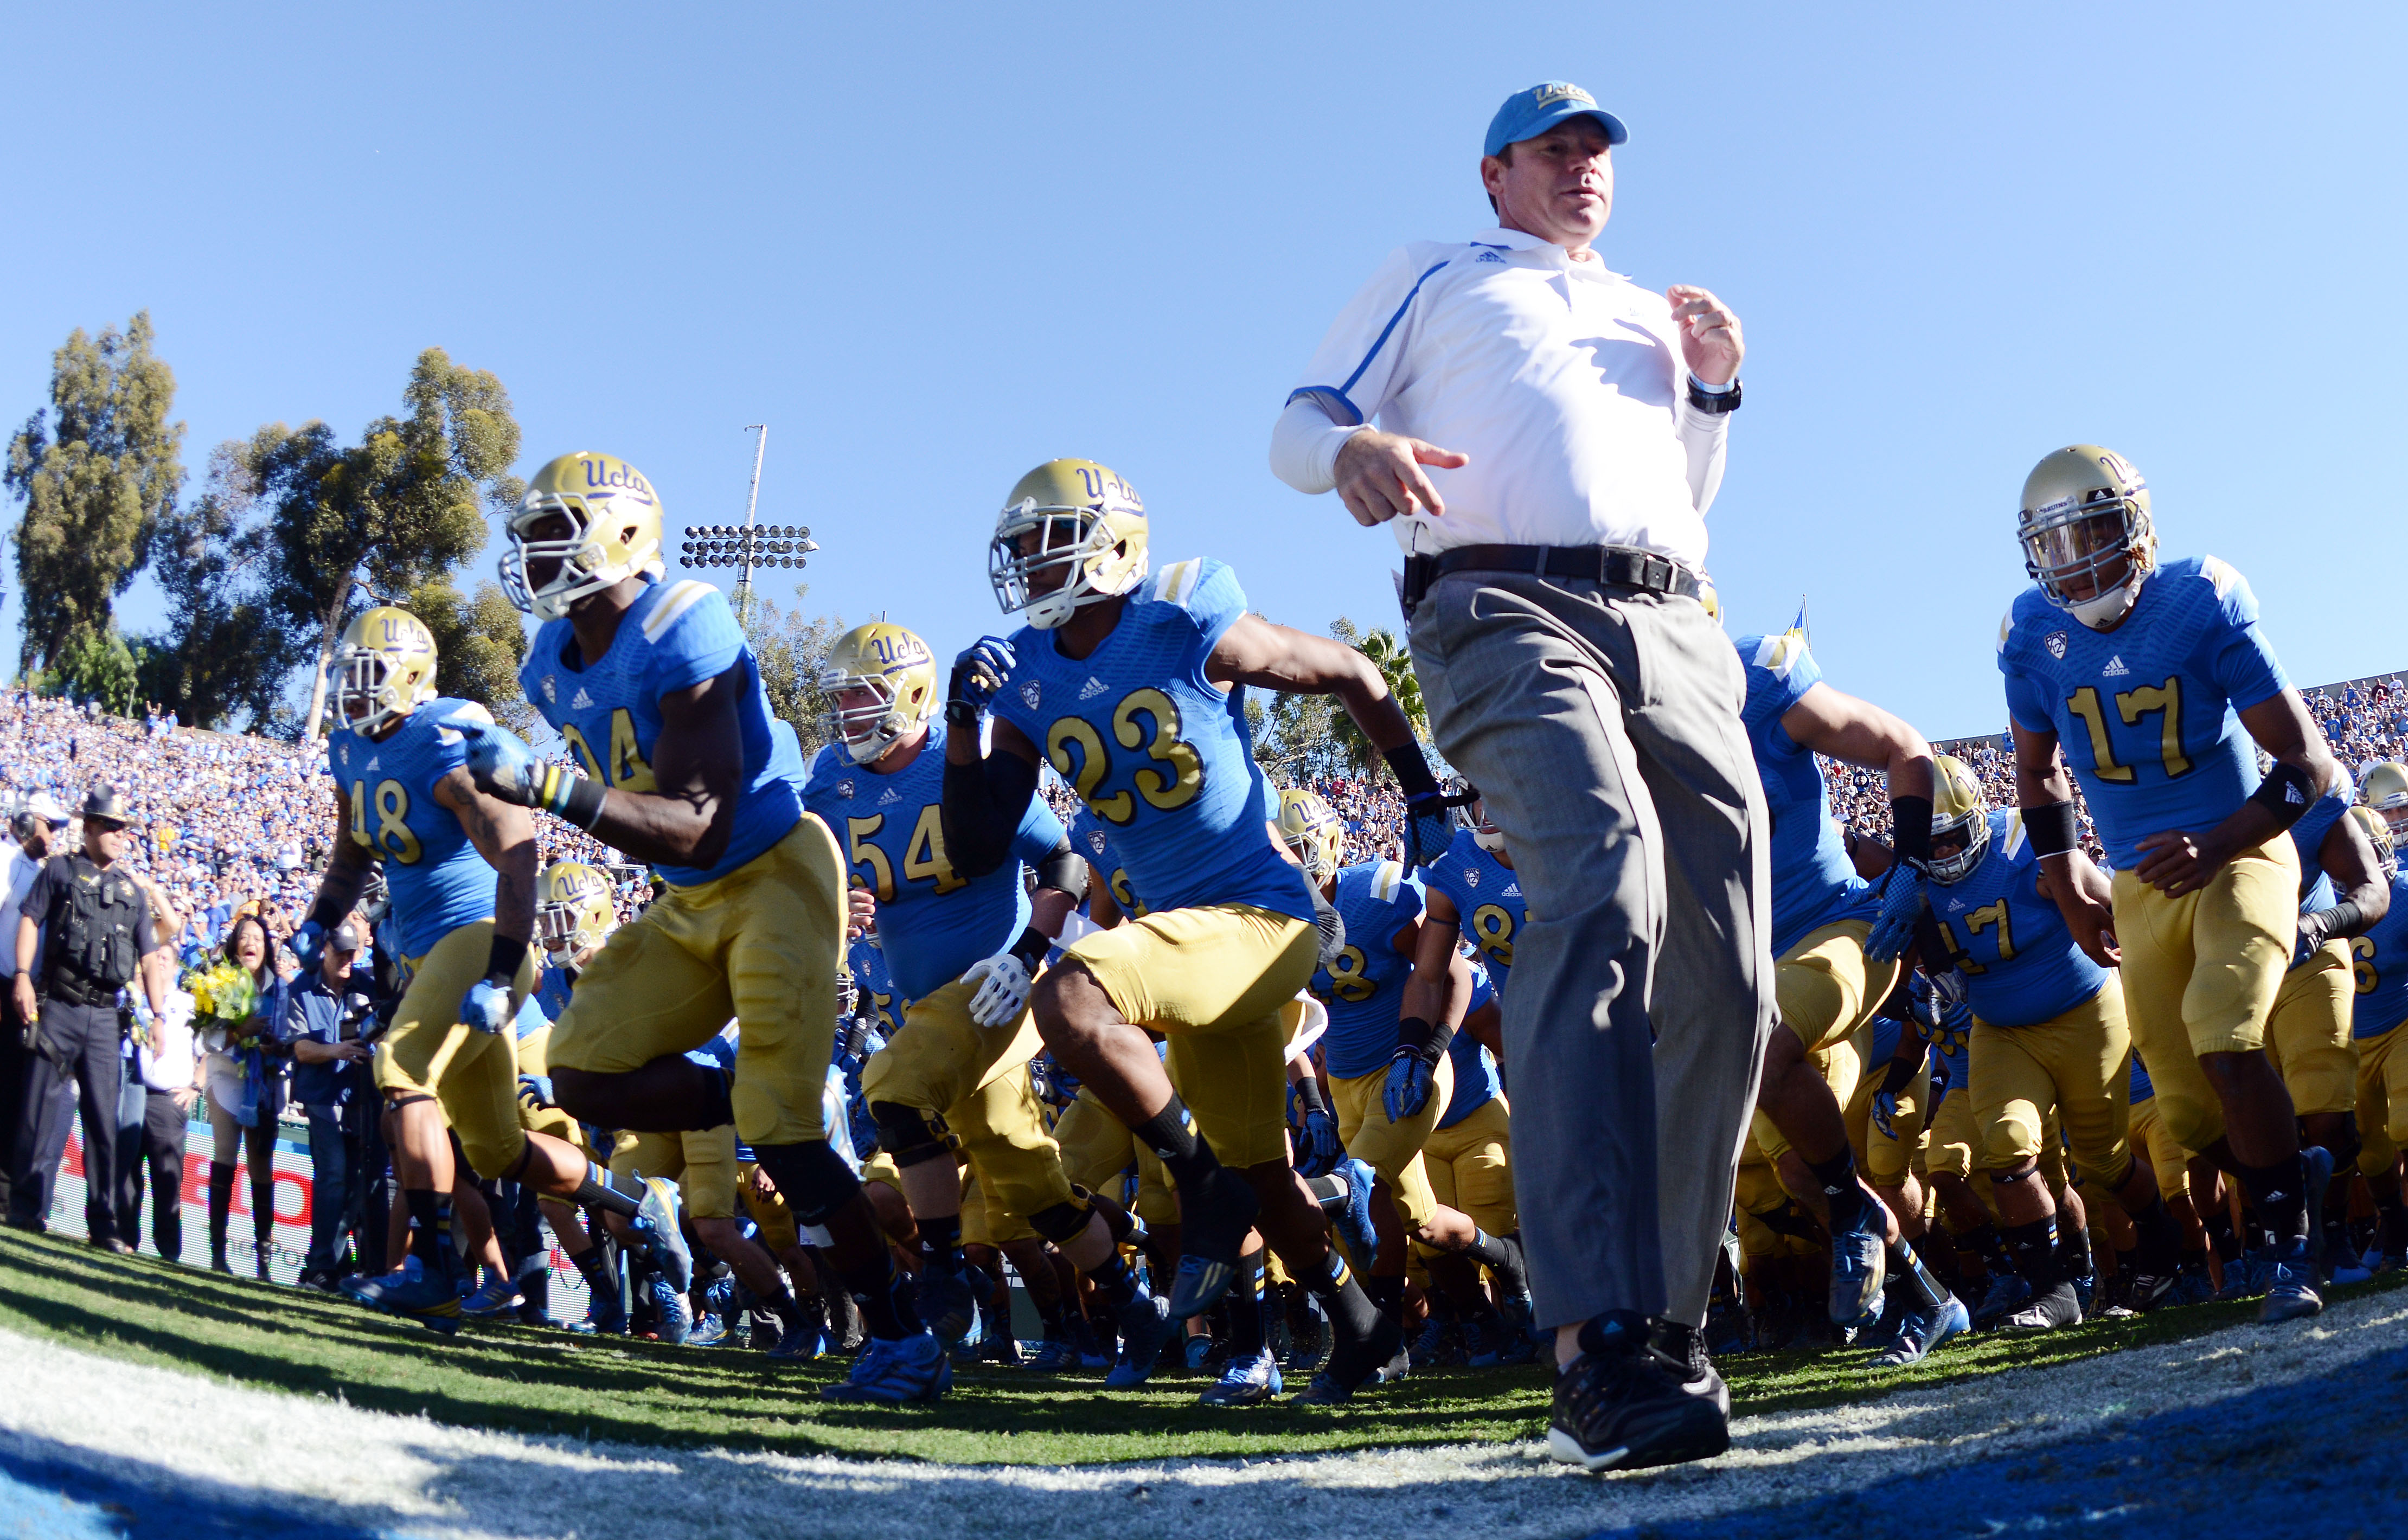 Jim Mora has led UCLA to 29 wins over the past three seasons. He's pictured here as the Bruins run out of the Rose Bowl tunnel against Stanford last November. (Will Lester/Staff)